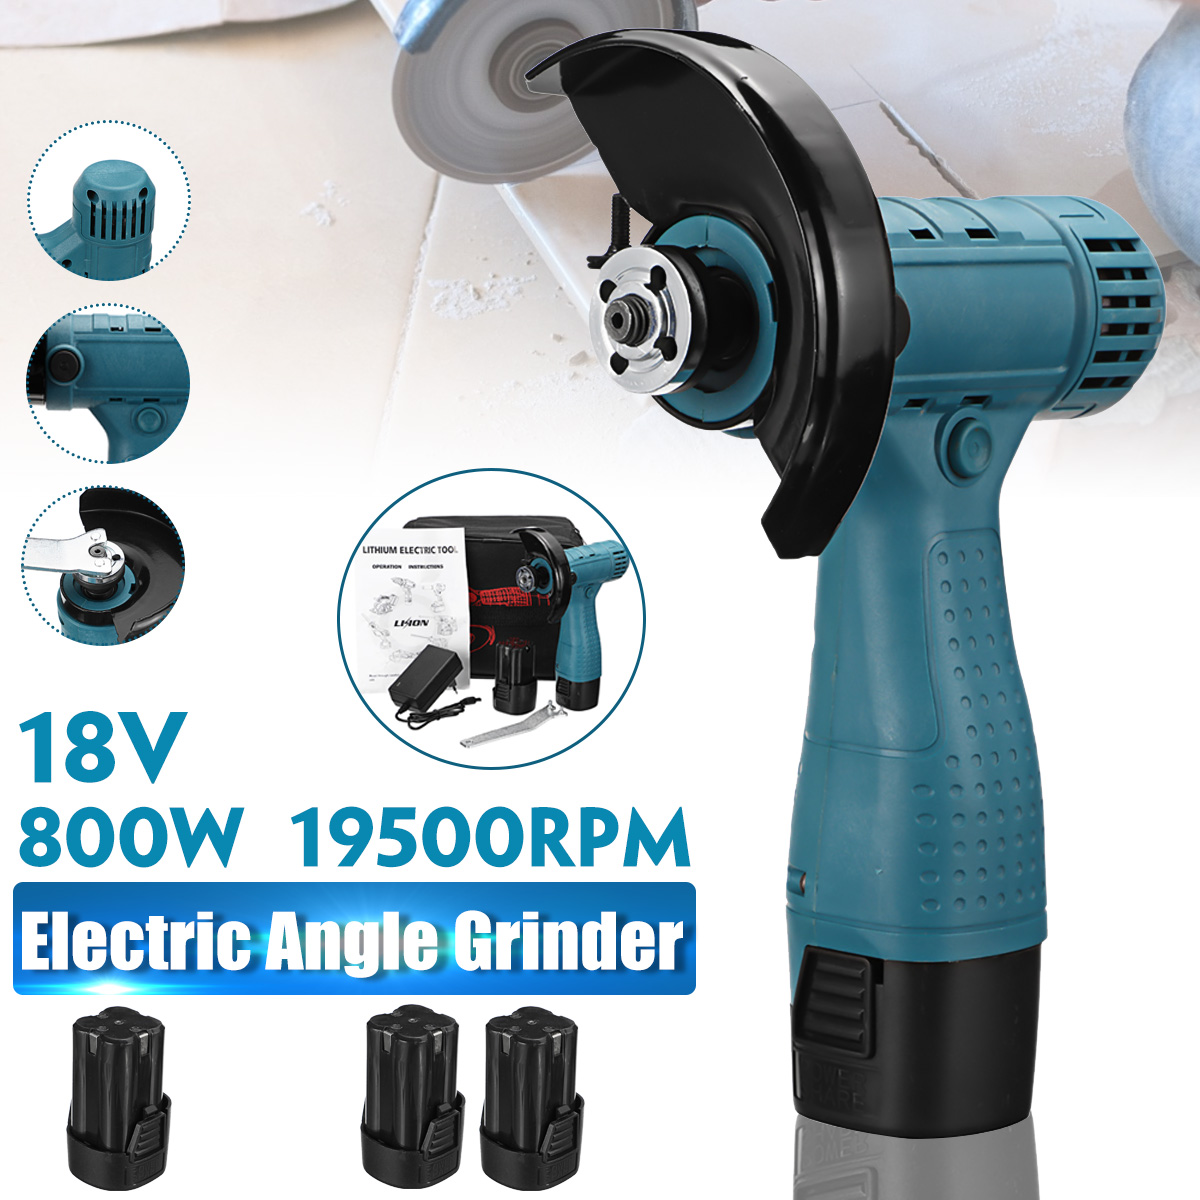 100mm-18V-800W-Electric-Angle-Grinder-Portable-Handheld-Cutting-Polishing-Tool-W-12-Battery-1871661-3